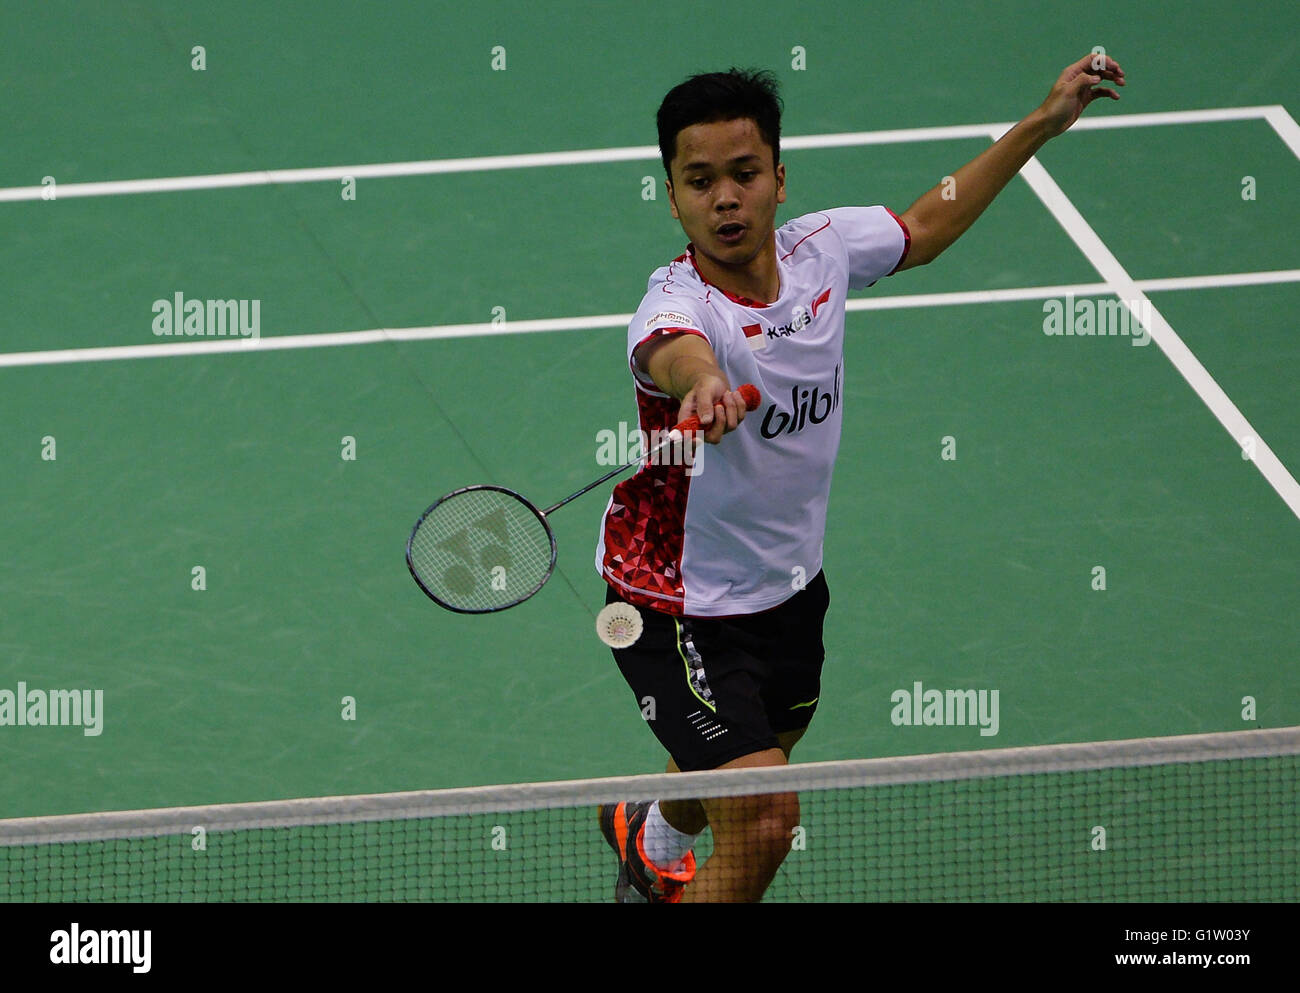 Kunshan, China's Jiangsu Province. 20th May, 2016. Ginting Anthony of Indonesia competes during the men's singles match against Lee Dong Keun of South Korea in the semifinal match at the Thomas Cup badminton championship in Kunshan, east China's Jiangsu Province, May 20, 2016. Ginting Anthony won 2-0 and Indonesia won 3-1. © Ji Chunpeng/Xinhua/Alamy Live News Stock Photo